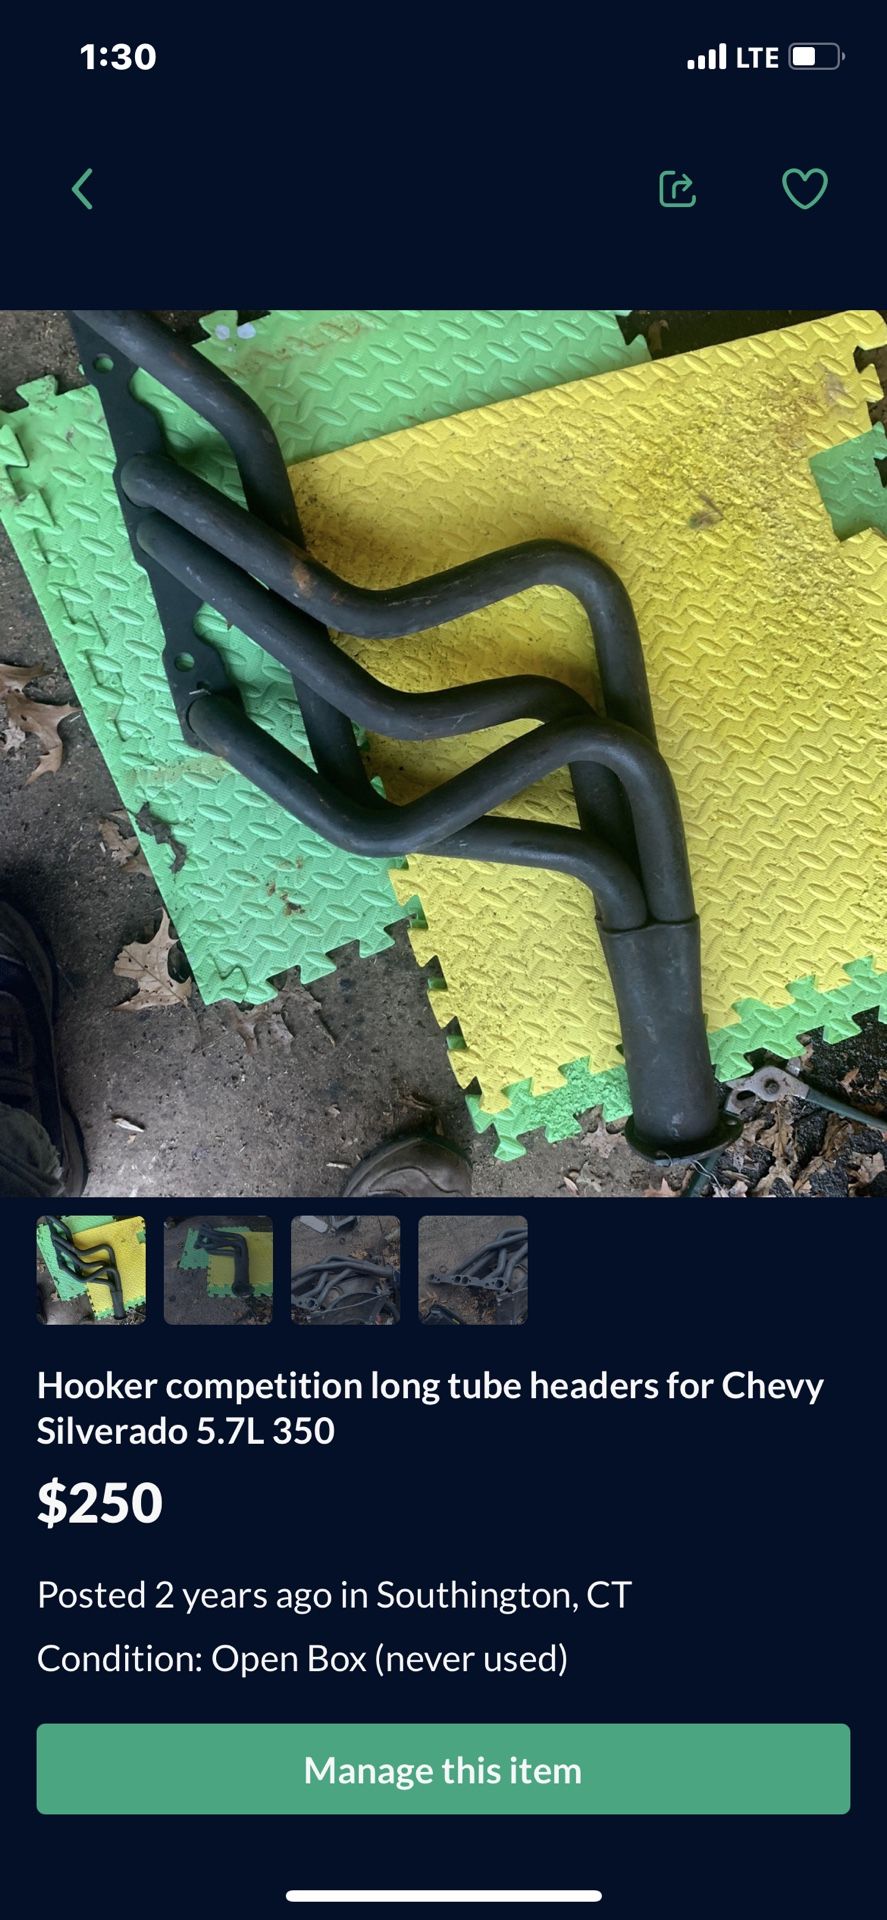 Chevy 350ci Hooker Competition Long Tube Headers 